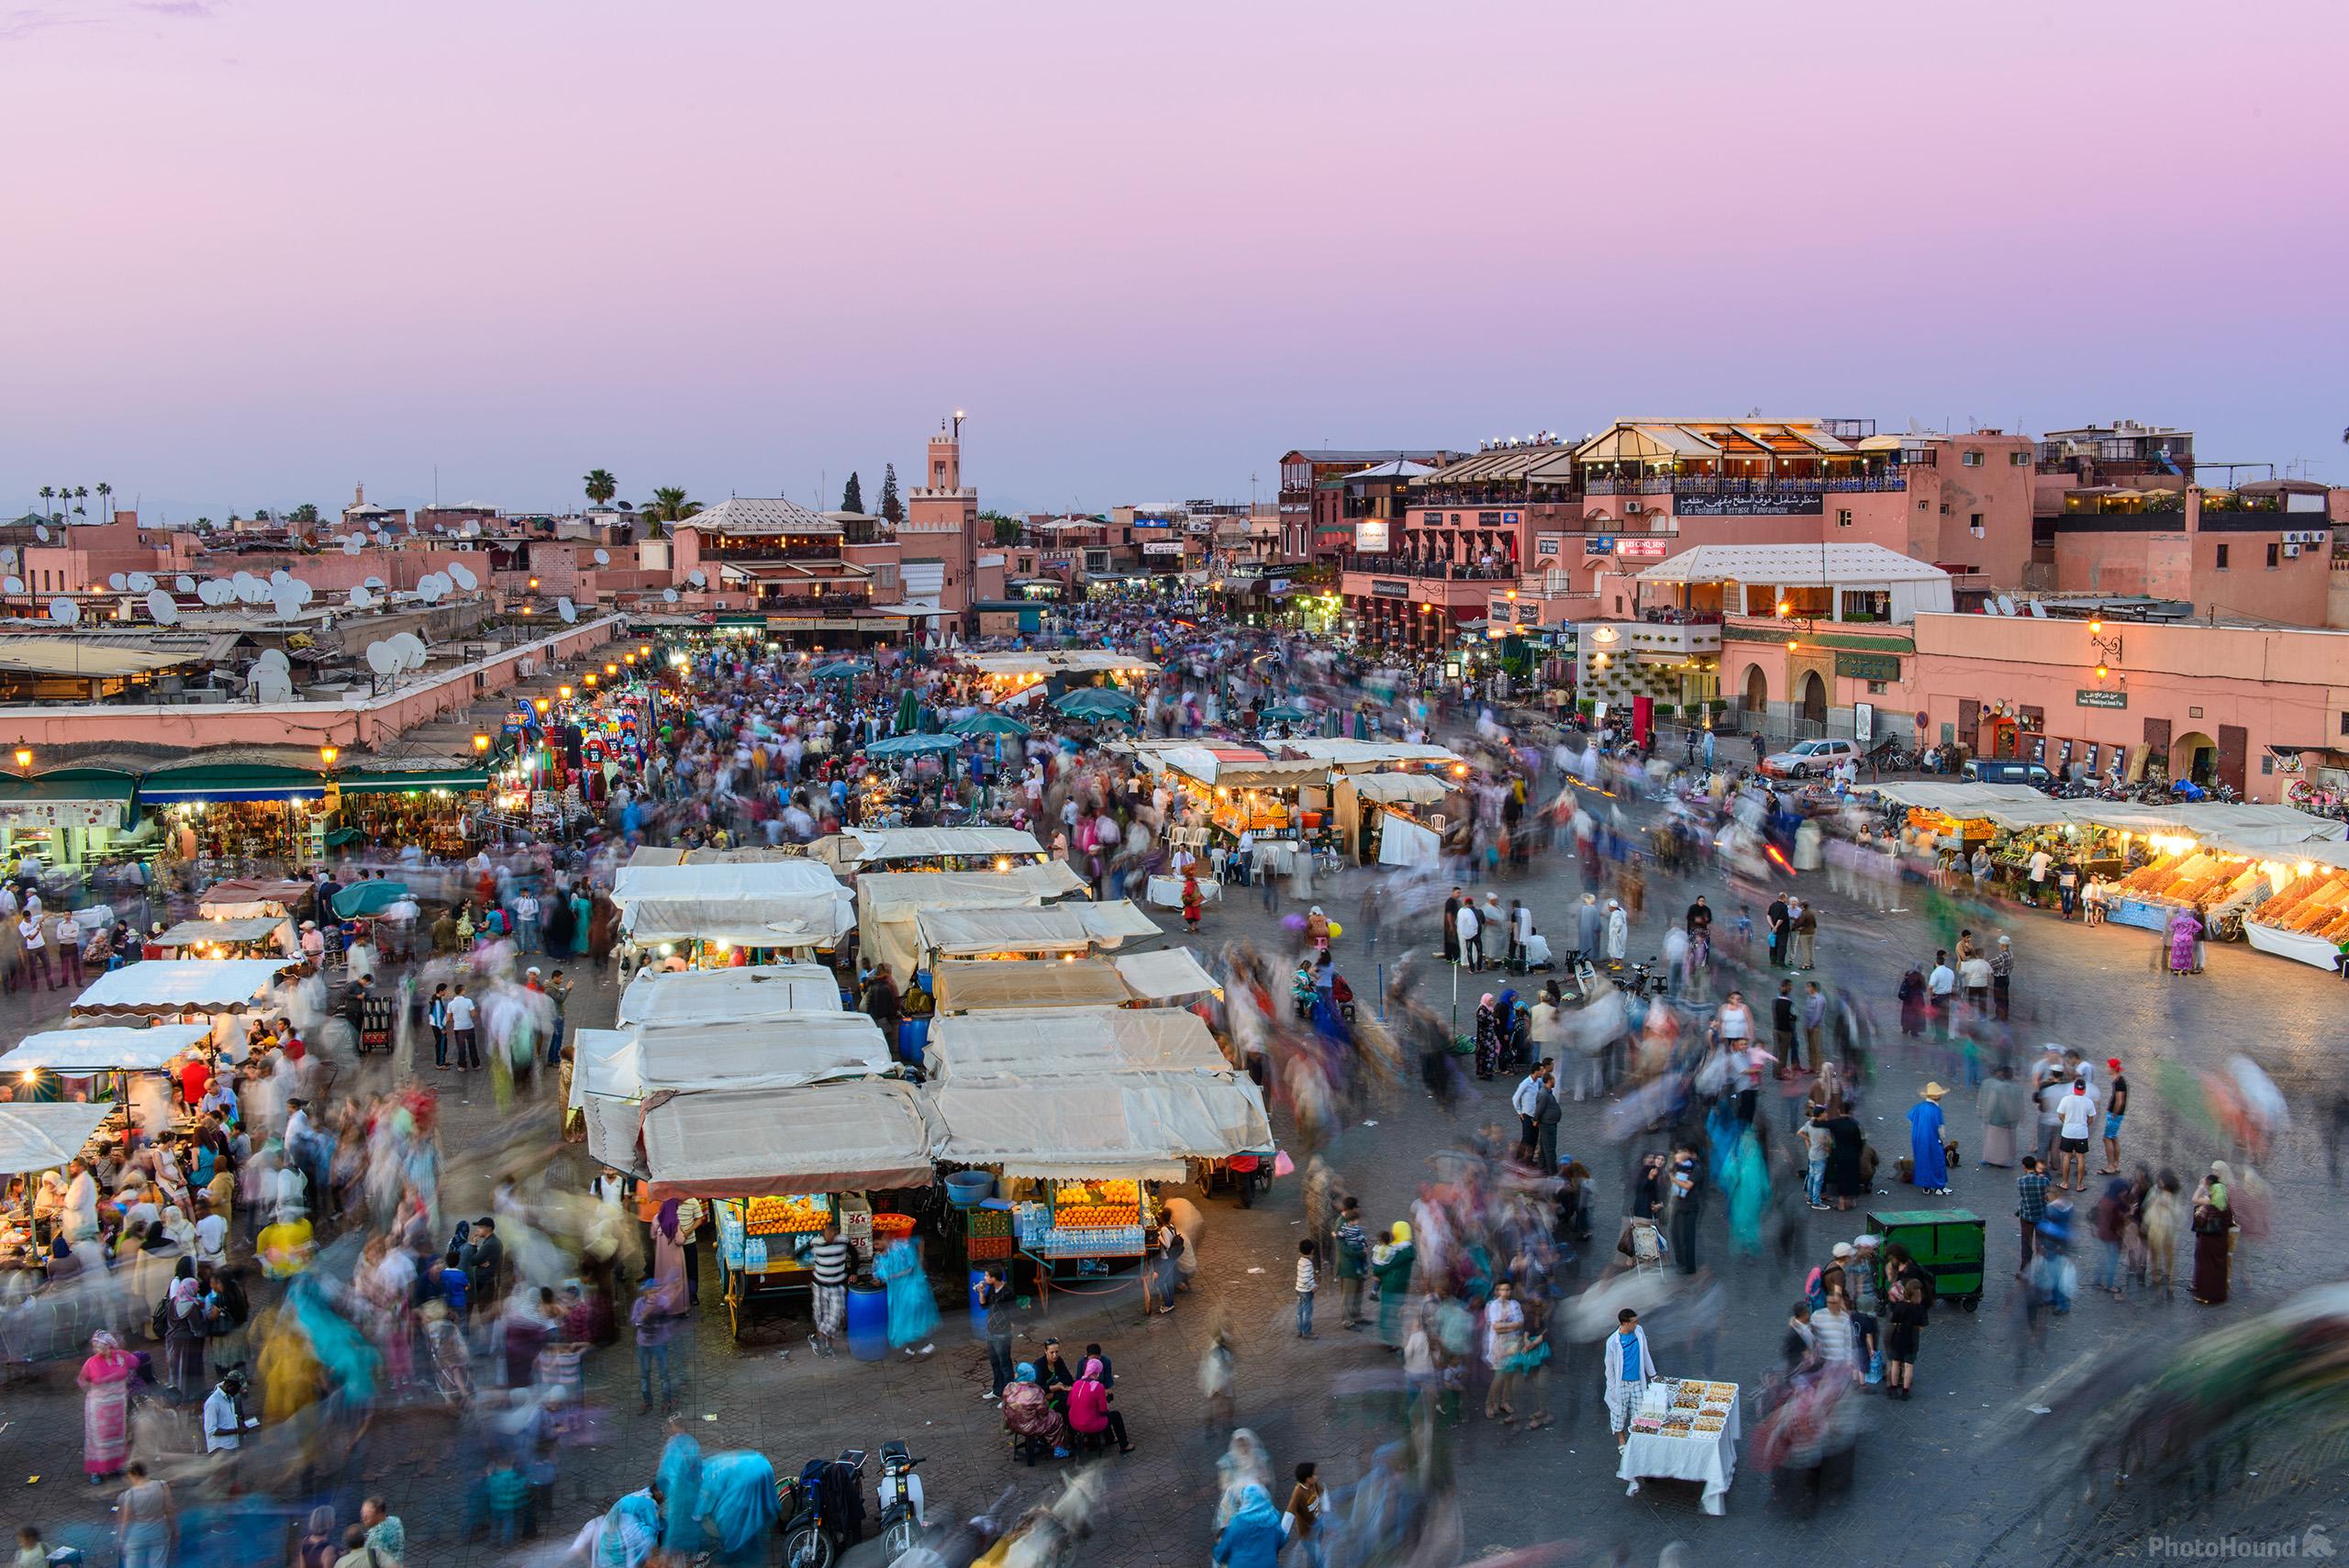 Image of Jemaa el-Fna from above by Luka Esenko